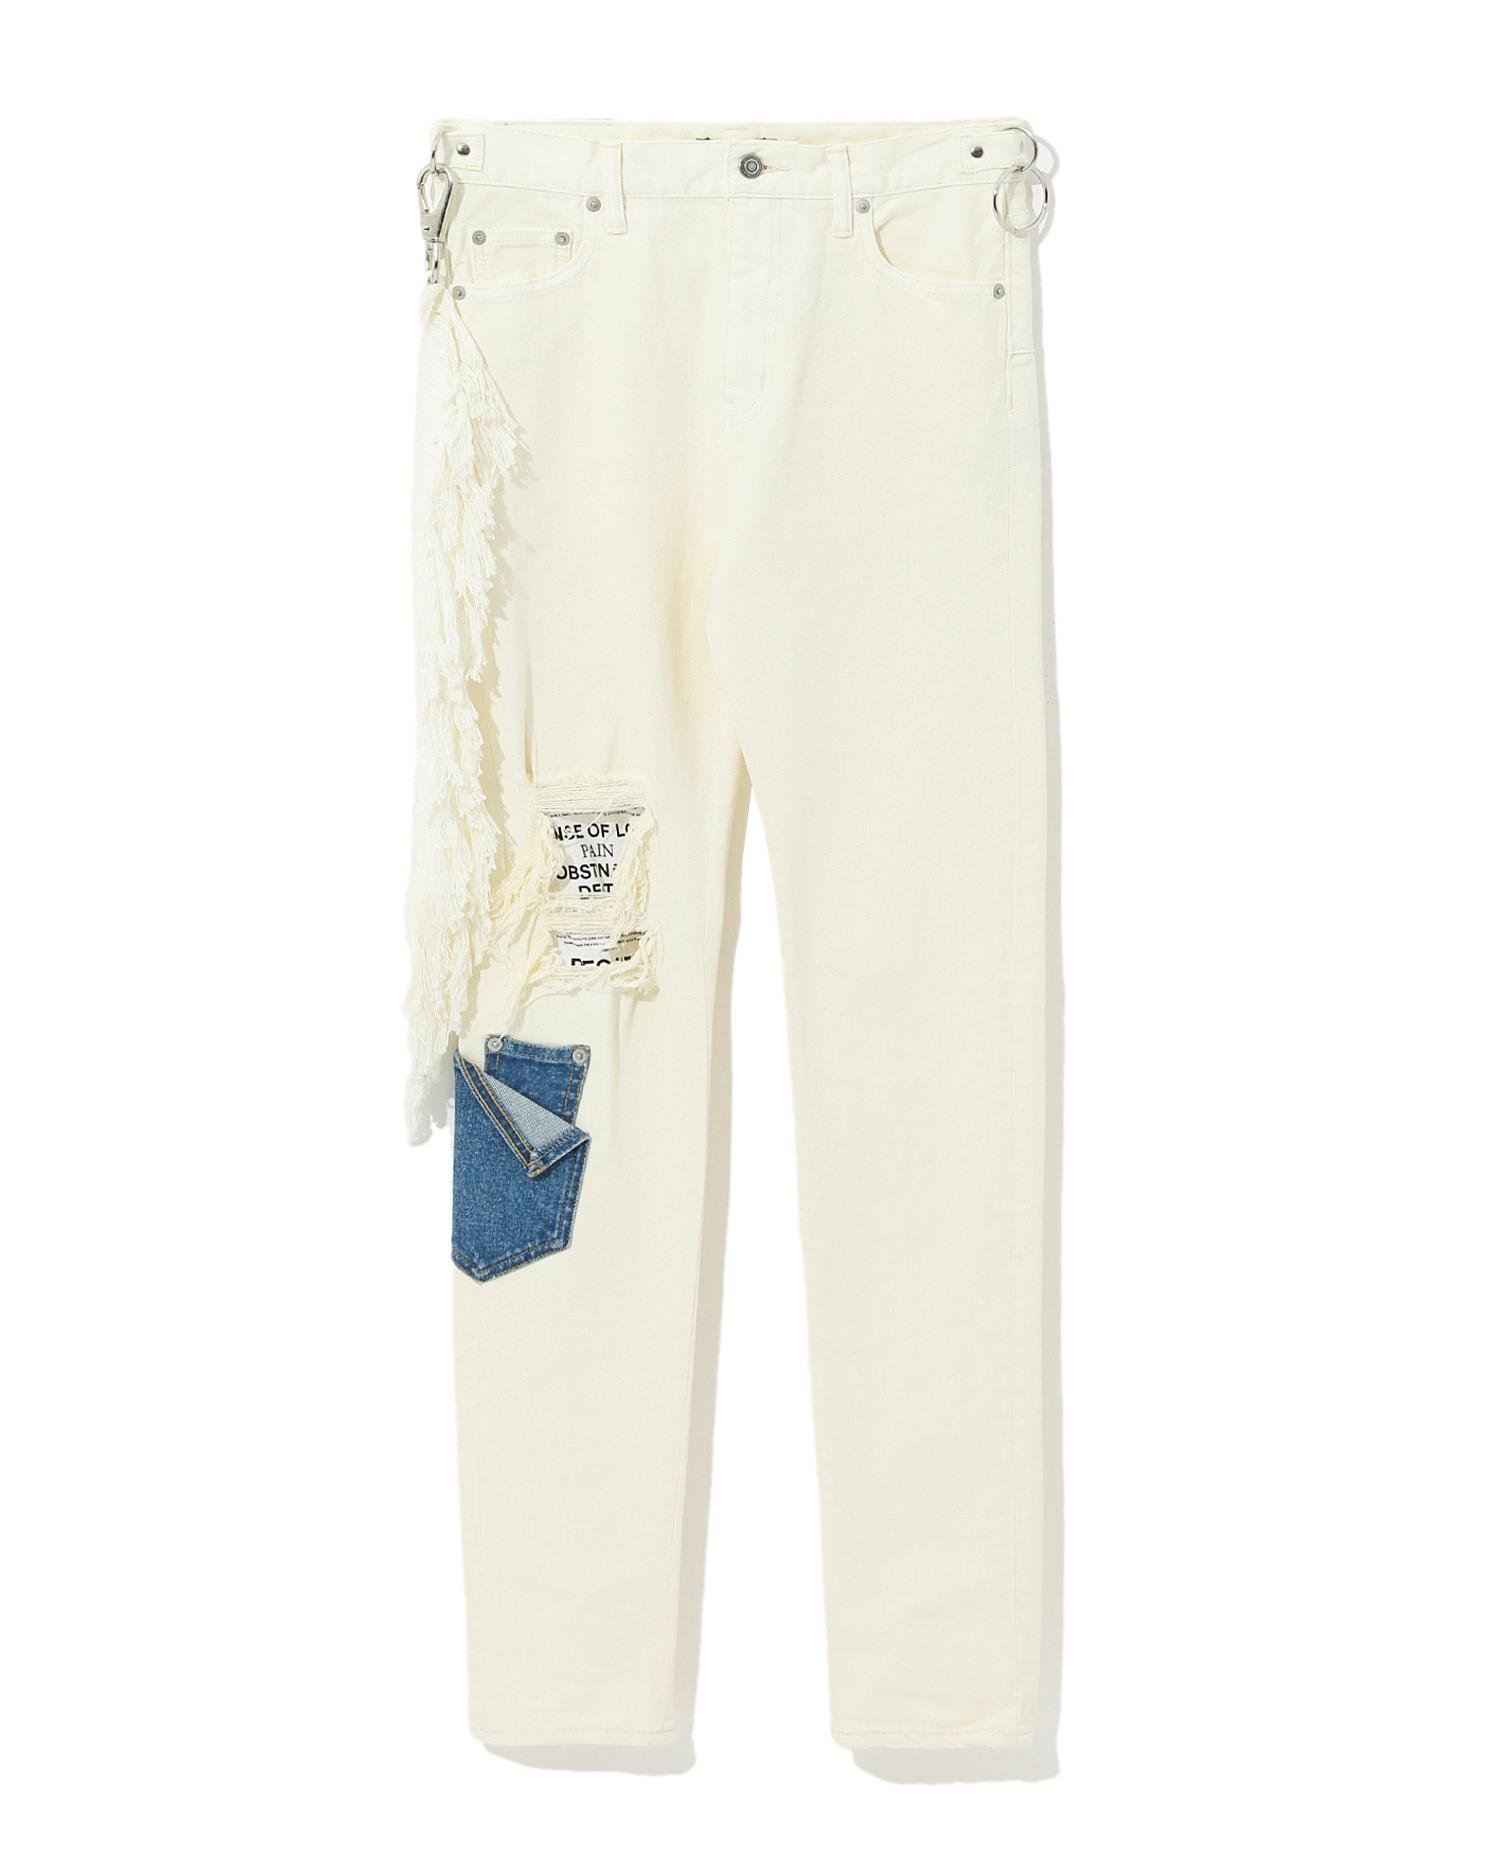 Tassel detail distressed jeans by CHRISTIAN DADA